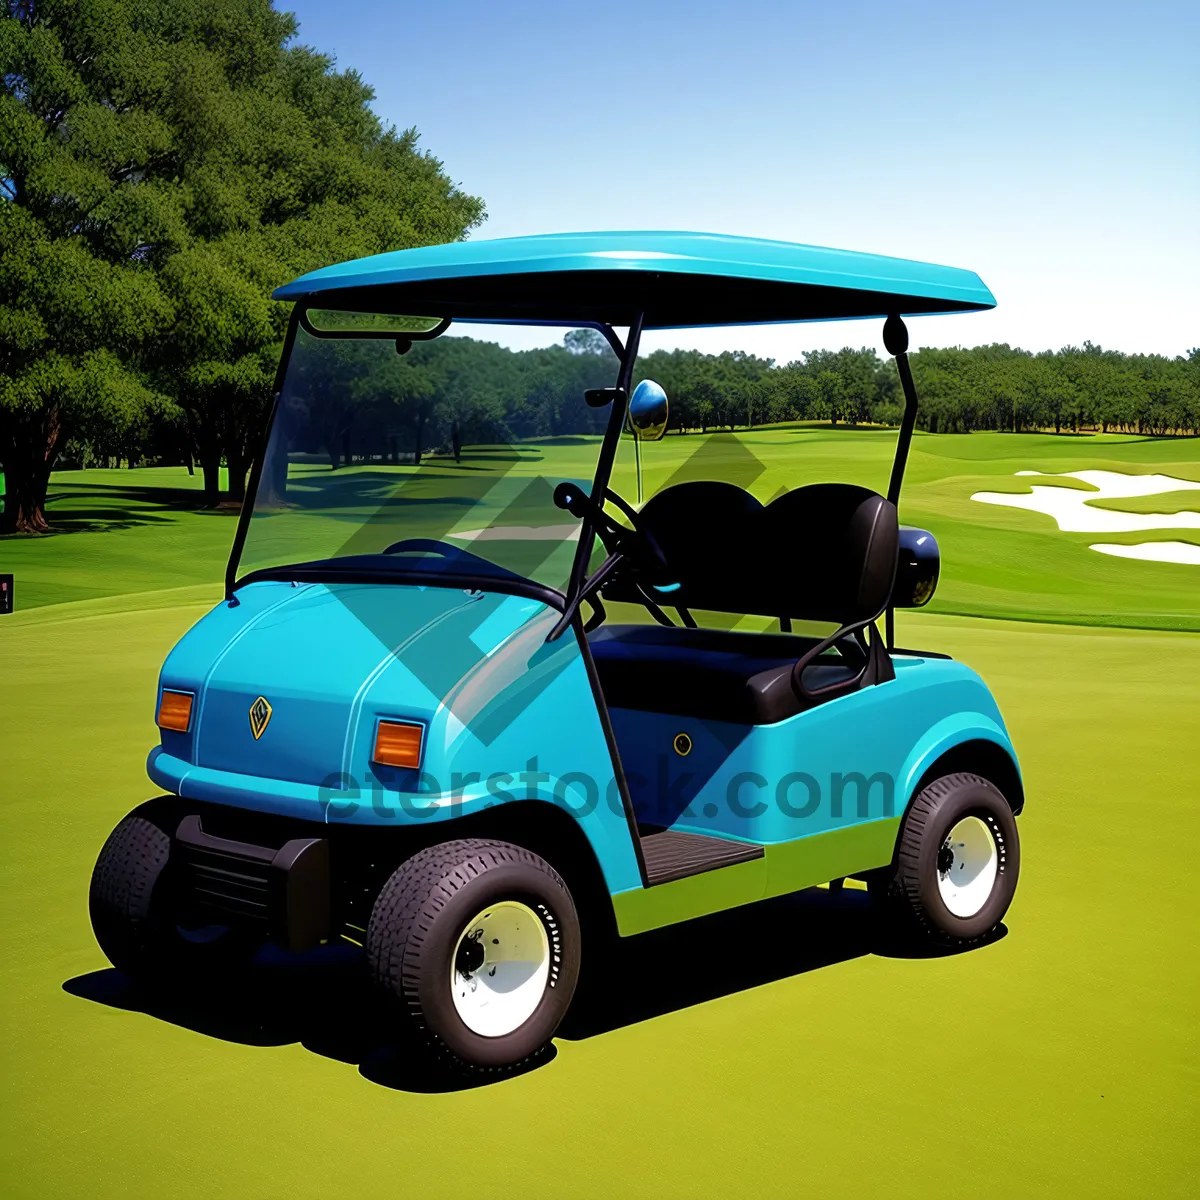 Picture of Golf Cart on Green Grass Course